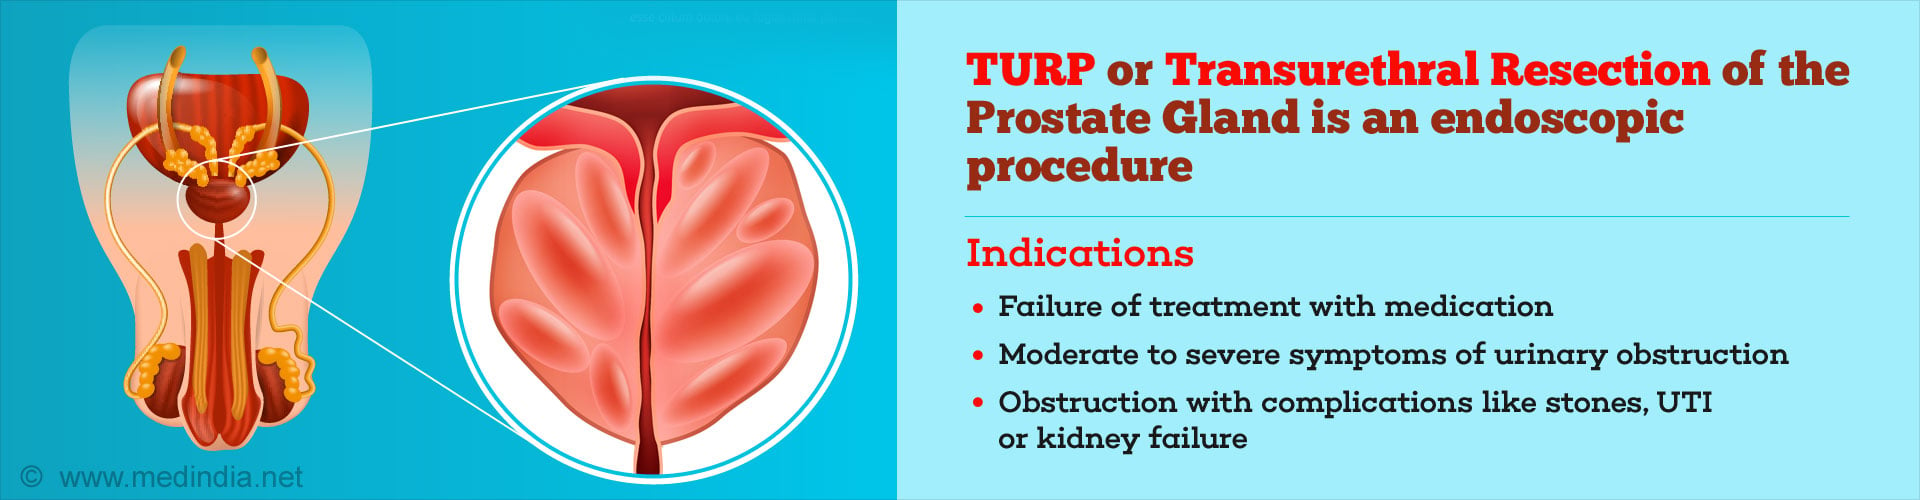 Transurethral Resection Of Prostate Turp For Prostate Enlargement 0314